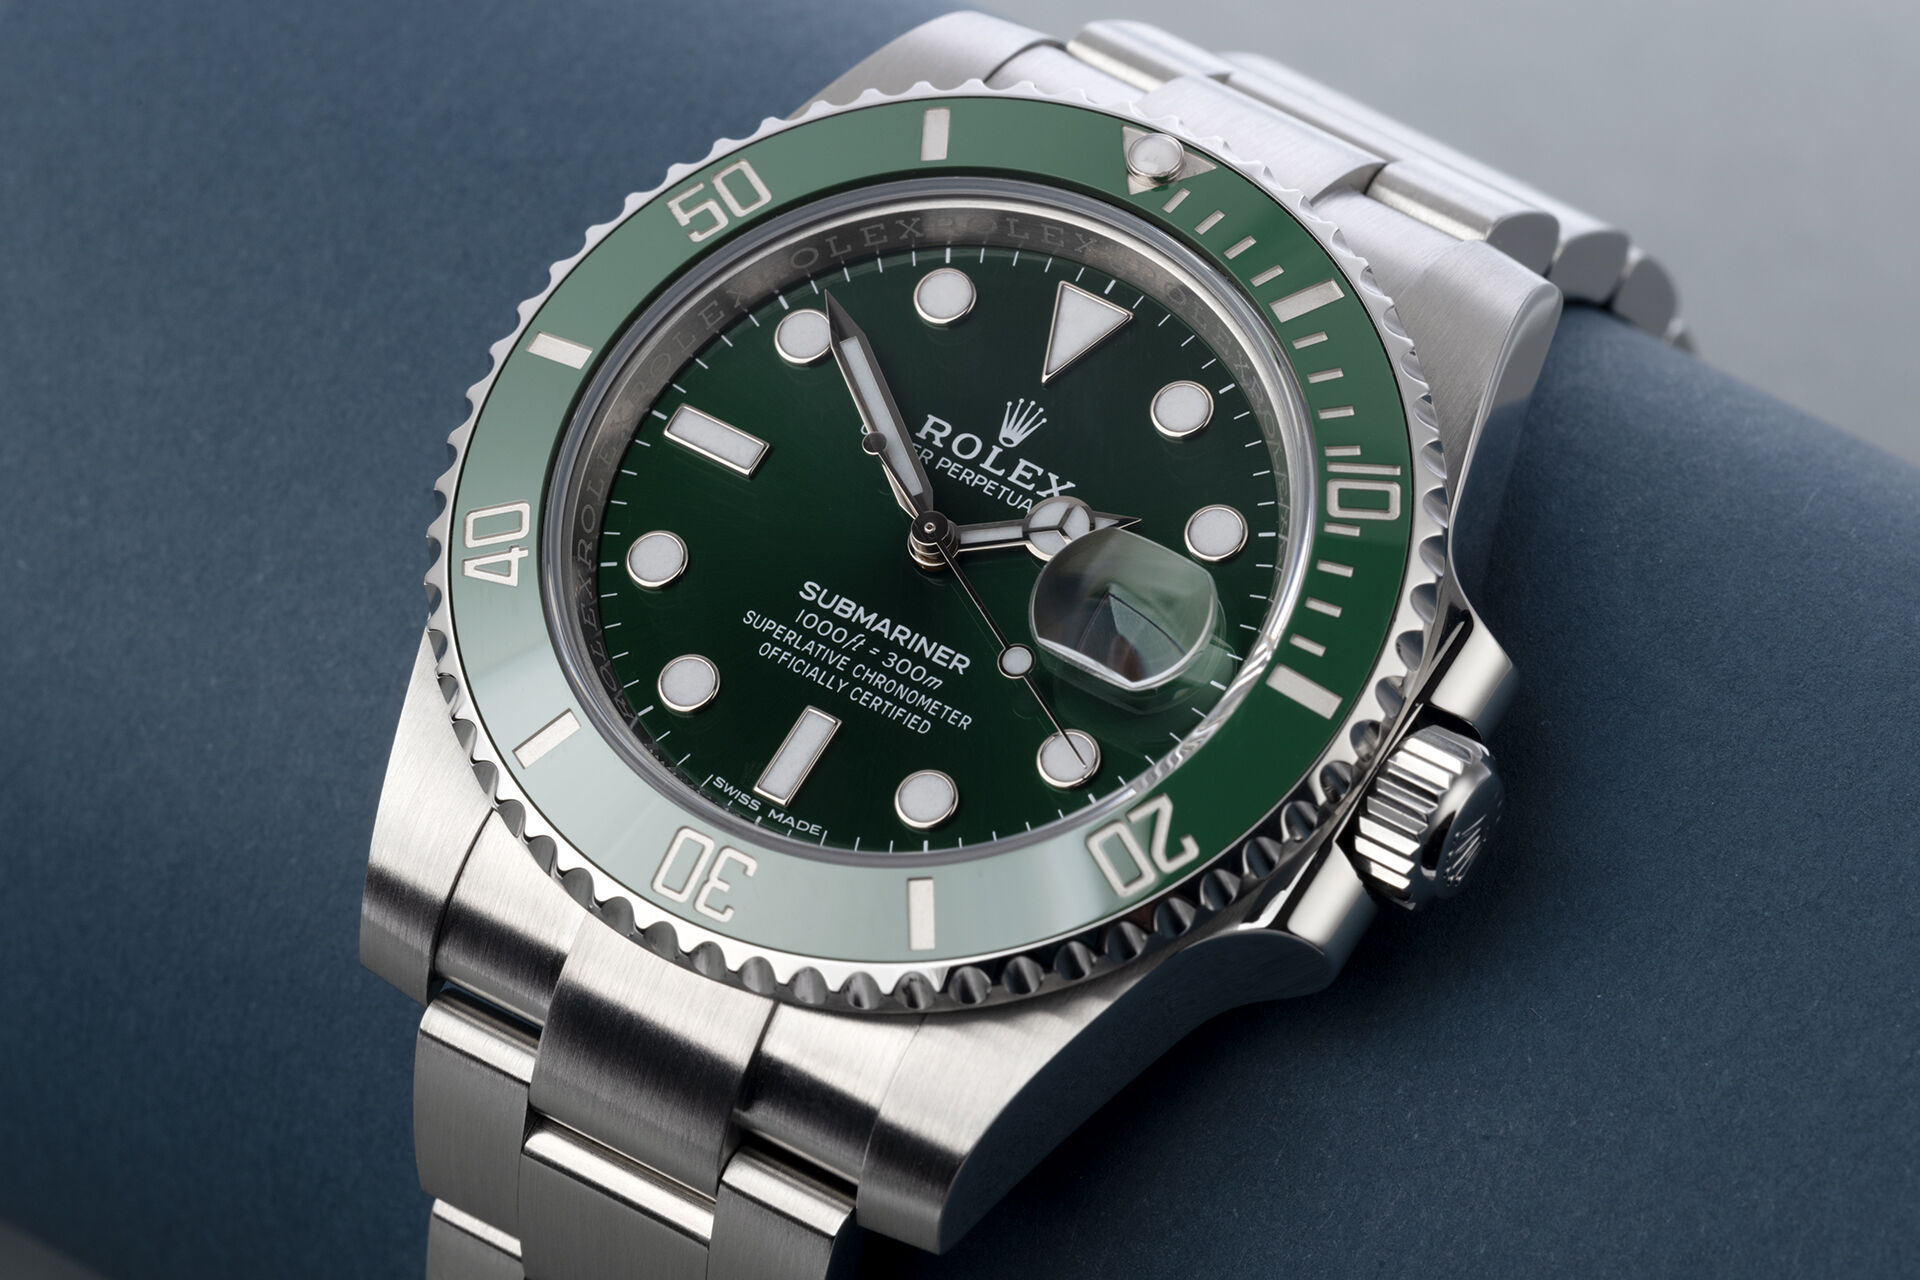 ref 116610LV | Discontinued - UK Purchased | Rolex Submariner Date